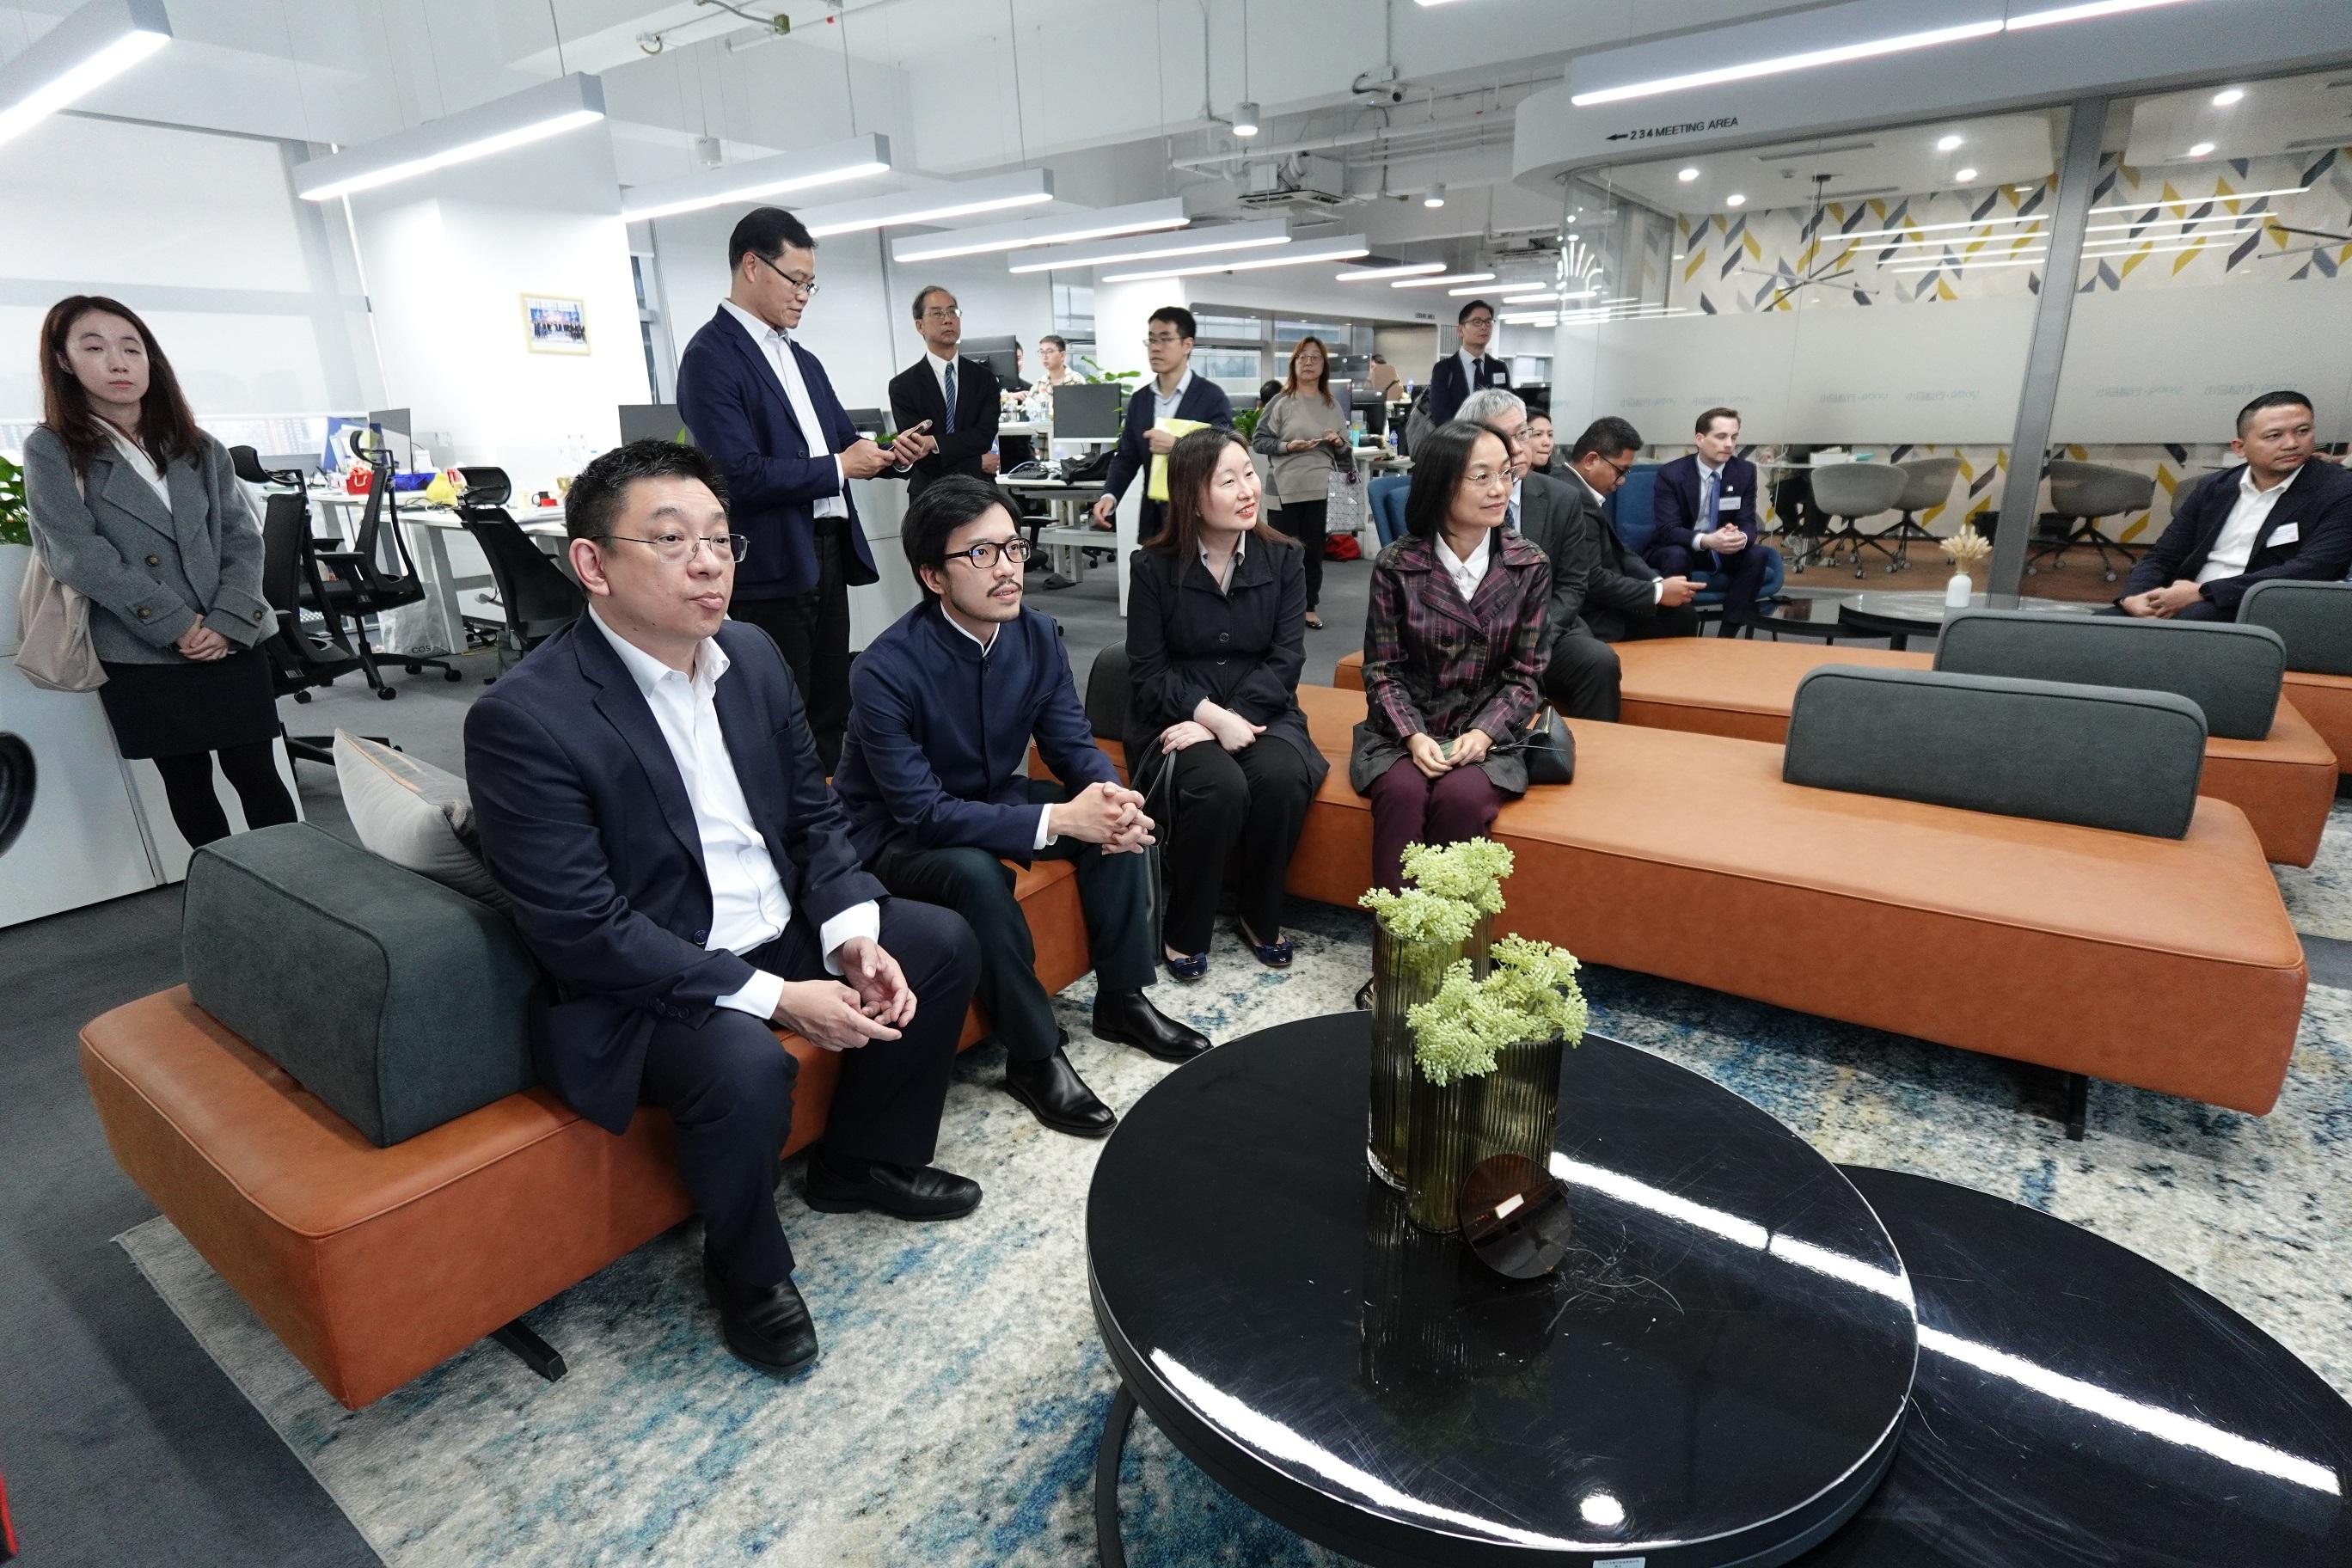 The business delegation of enterprises of Belt and Road countries operating in Hong Kong, led by the Secretary for Commerce and Economic Development, Mr Algernon Yau, continued the visit to the Guangdong-Hong Kong-Macao Greater Bay Area today (December 5). The delegation visited Pony.ai, an autonomous driving start-up in Nansha District, Guangzhou. Photo shows the Commissioner for Belt and Road, Mr Nicholas Ho (front row, second left), the Director of the Hong Kong Economic and Trade Office in Guangdong, Miss Linda So (front row, third left), and delegates being briefed by a representative of the company on its latest developments.